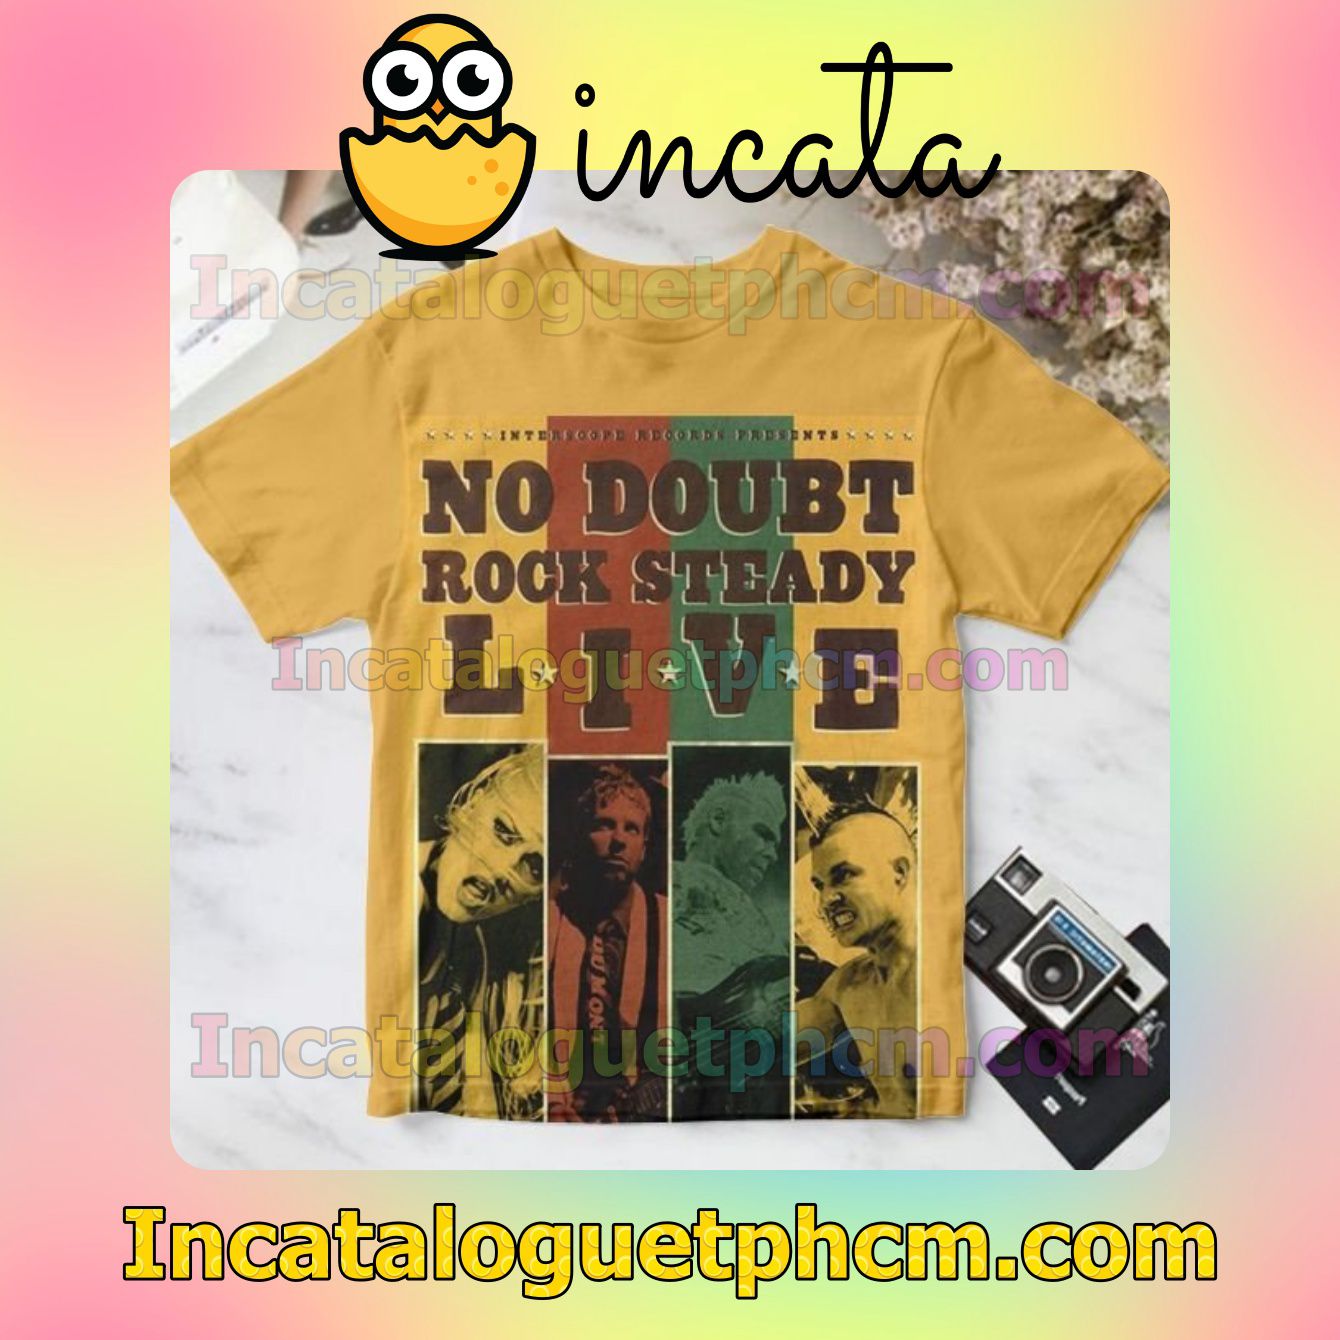 No Doubt Rock Steady Live Album Cover Personalized Shirt